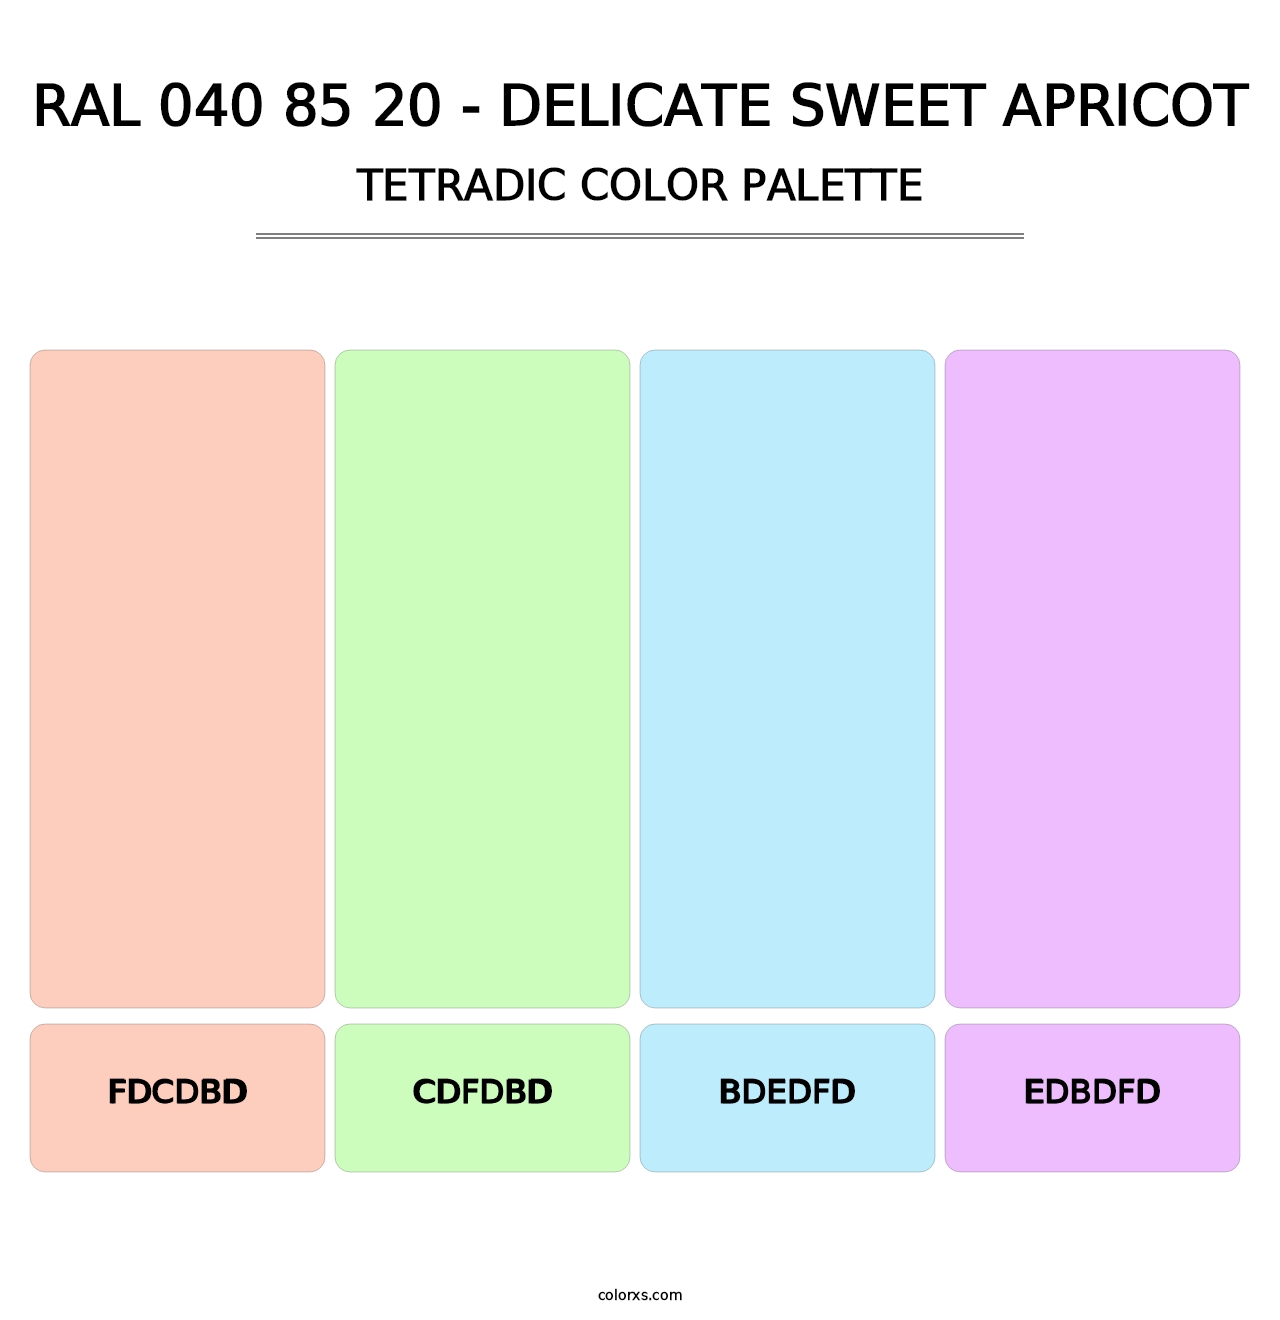 RAL 040 85 20 - Delicate Sweet Apricot - Tetradic Color Palette